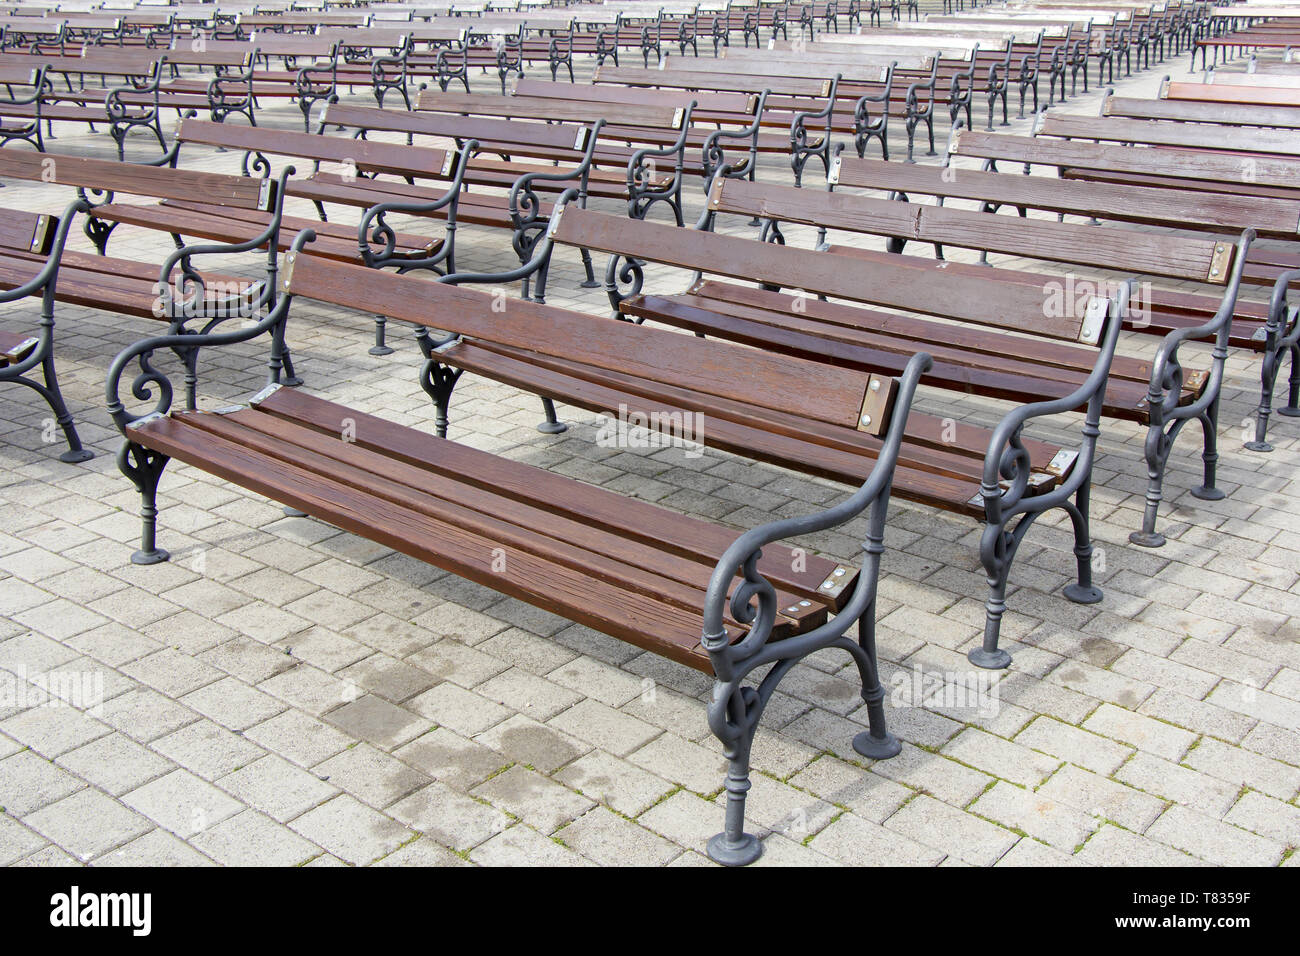 Lot of Rows of empty brown wooden benches Stock Photo